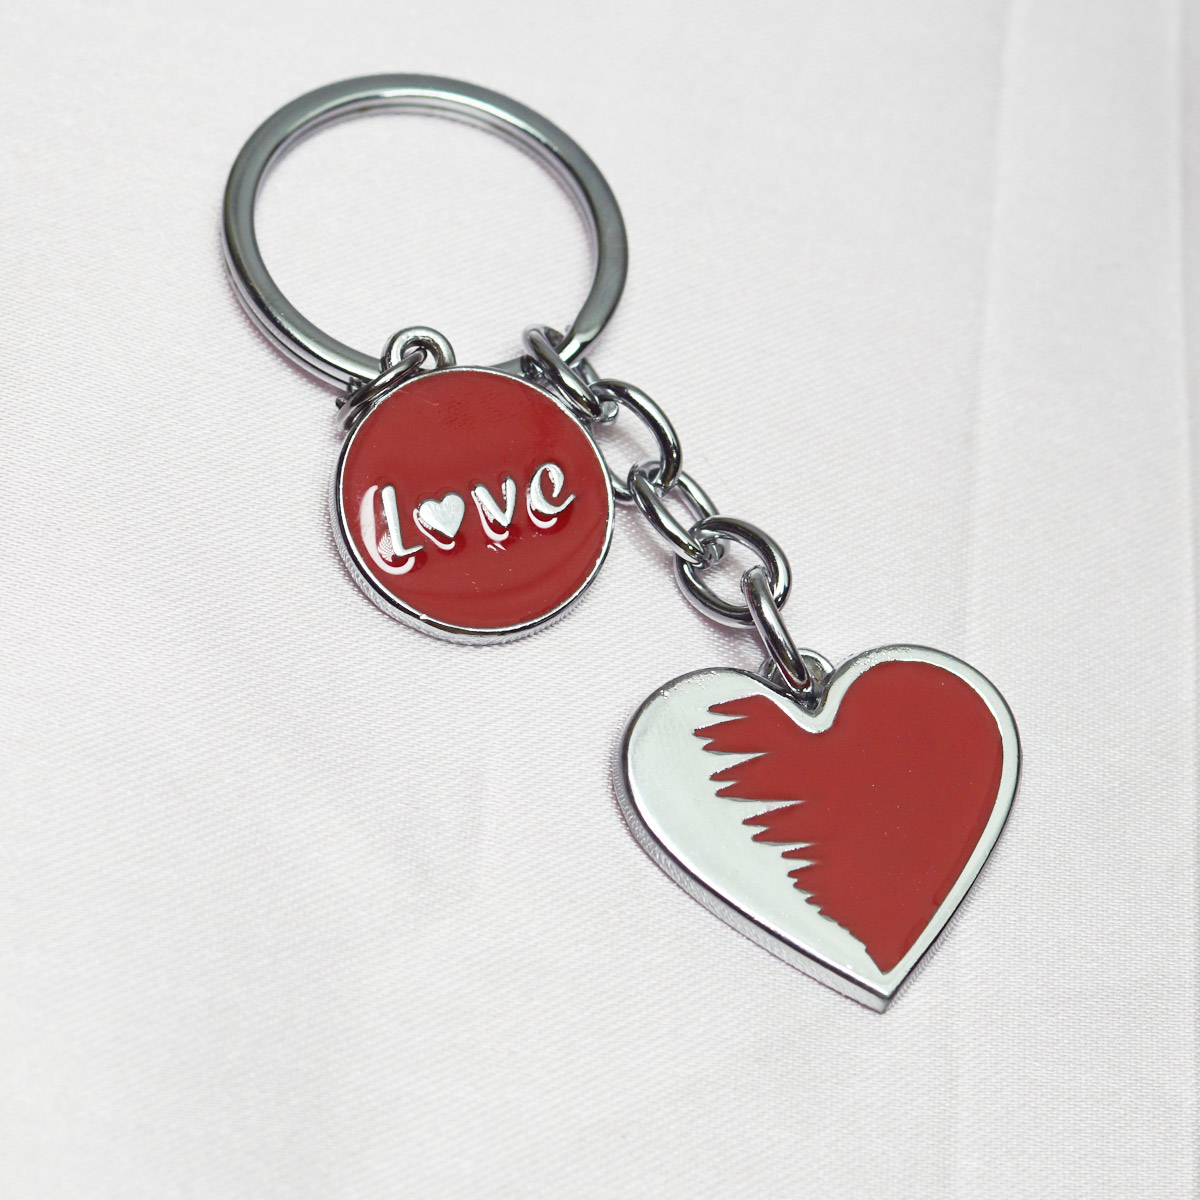 Penhouse.in Red Heart Shape Design And Love Doller Keychain With Engraving SKU KP076